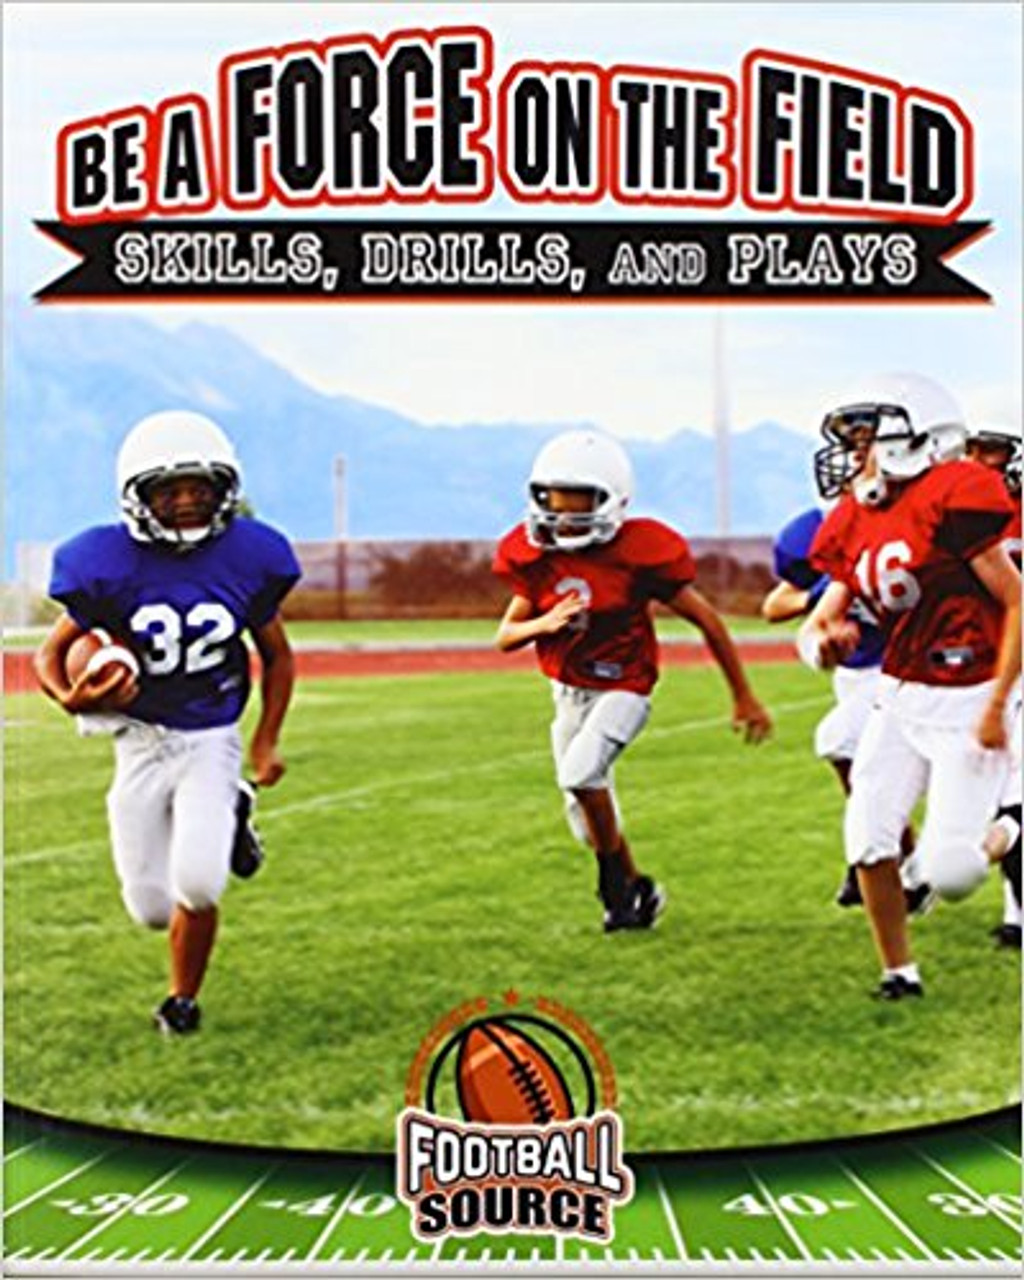 Be a Force on the Field: Skills, Drills, and Plays by Rachel Stuckey